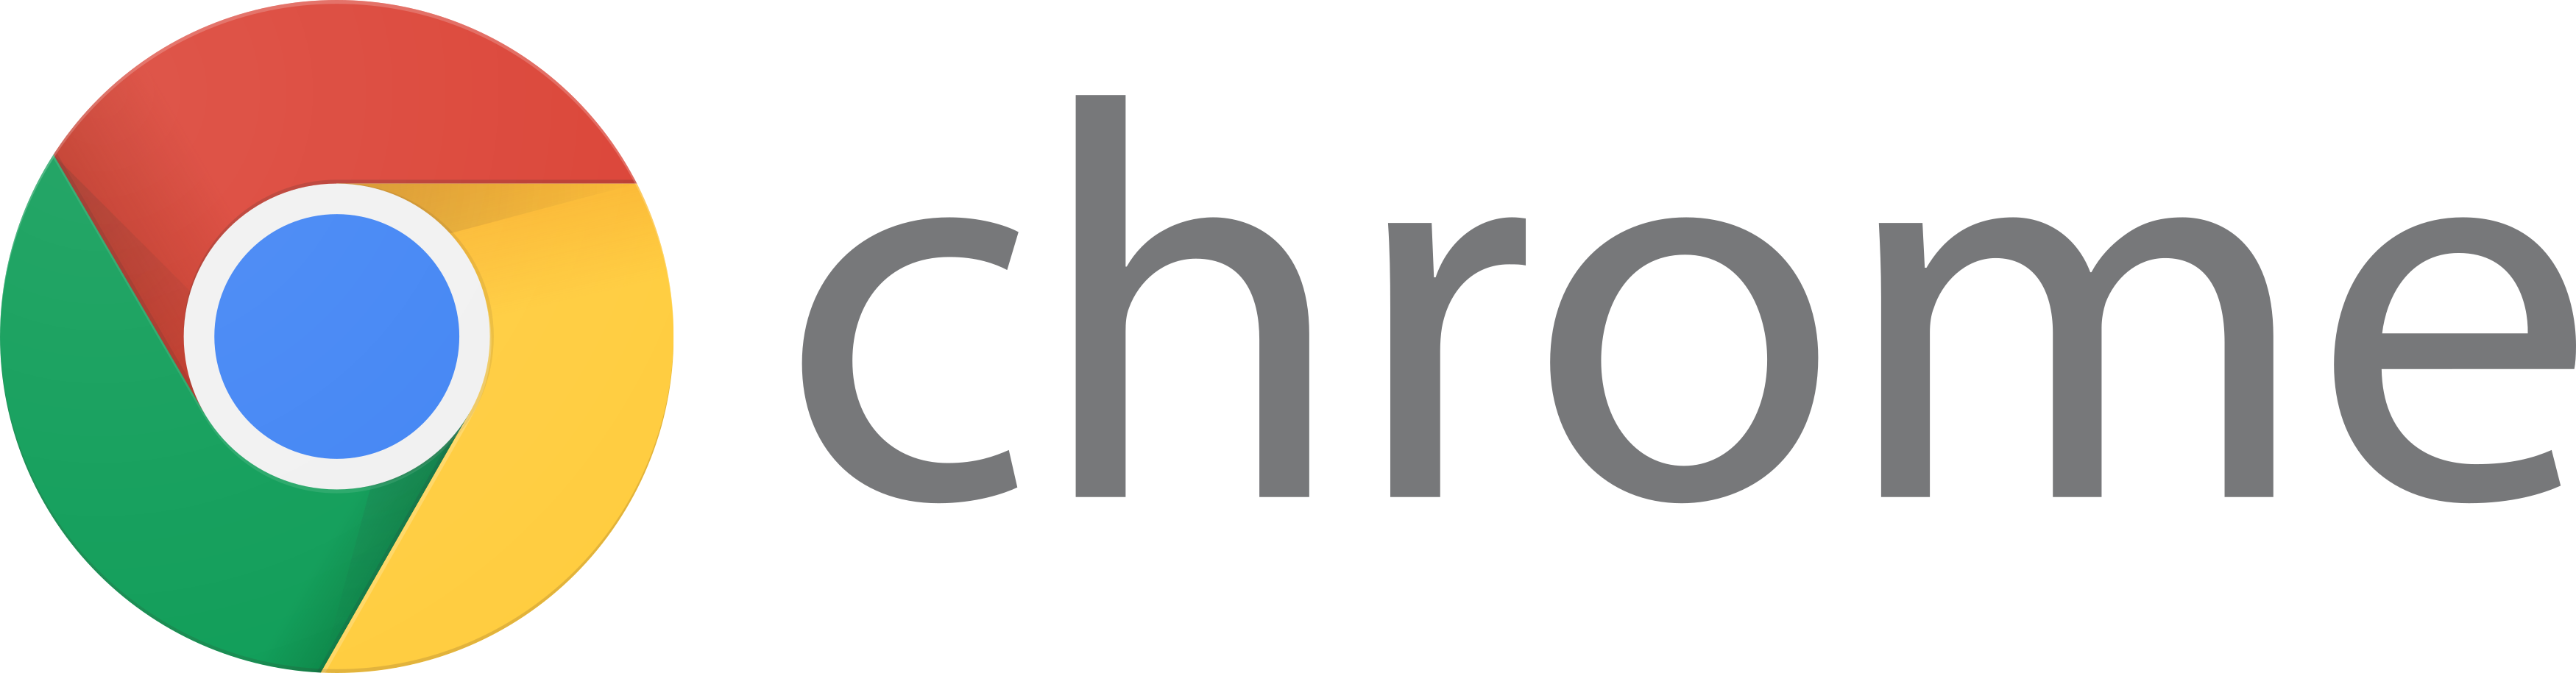 Chrome Logo Official Google Free PNG HQ PNG Image